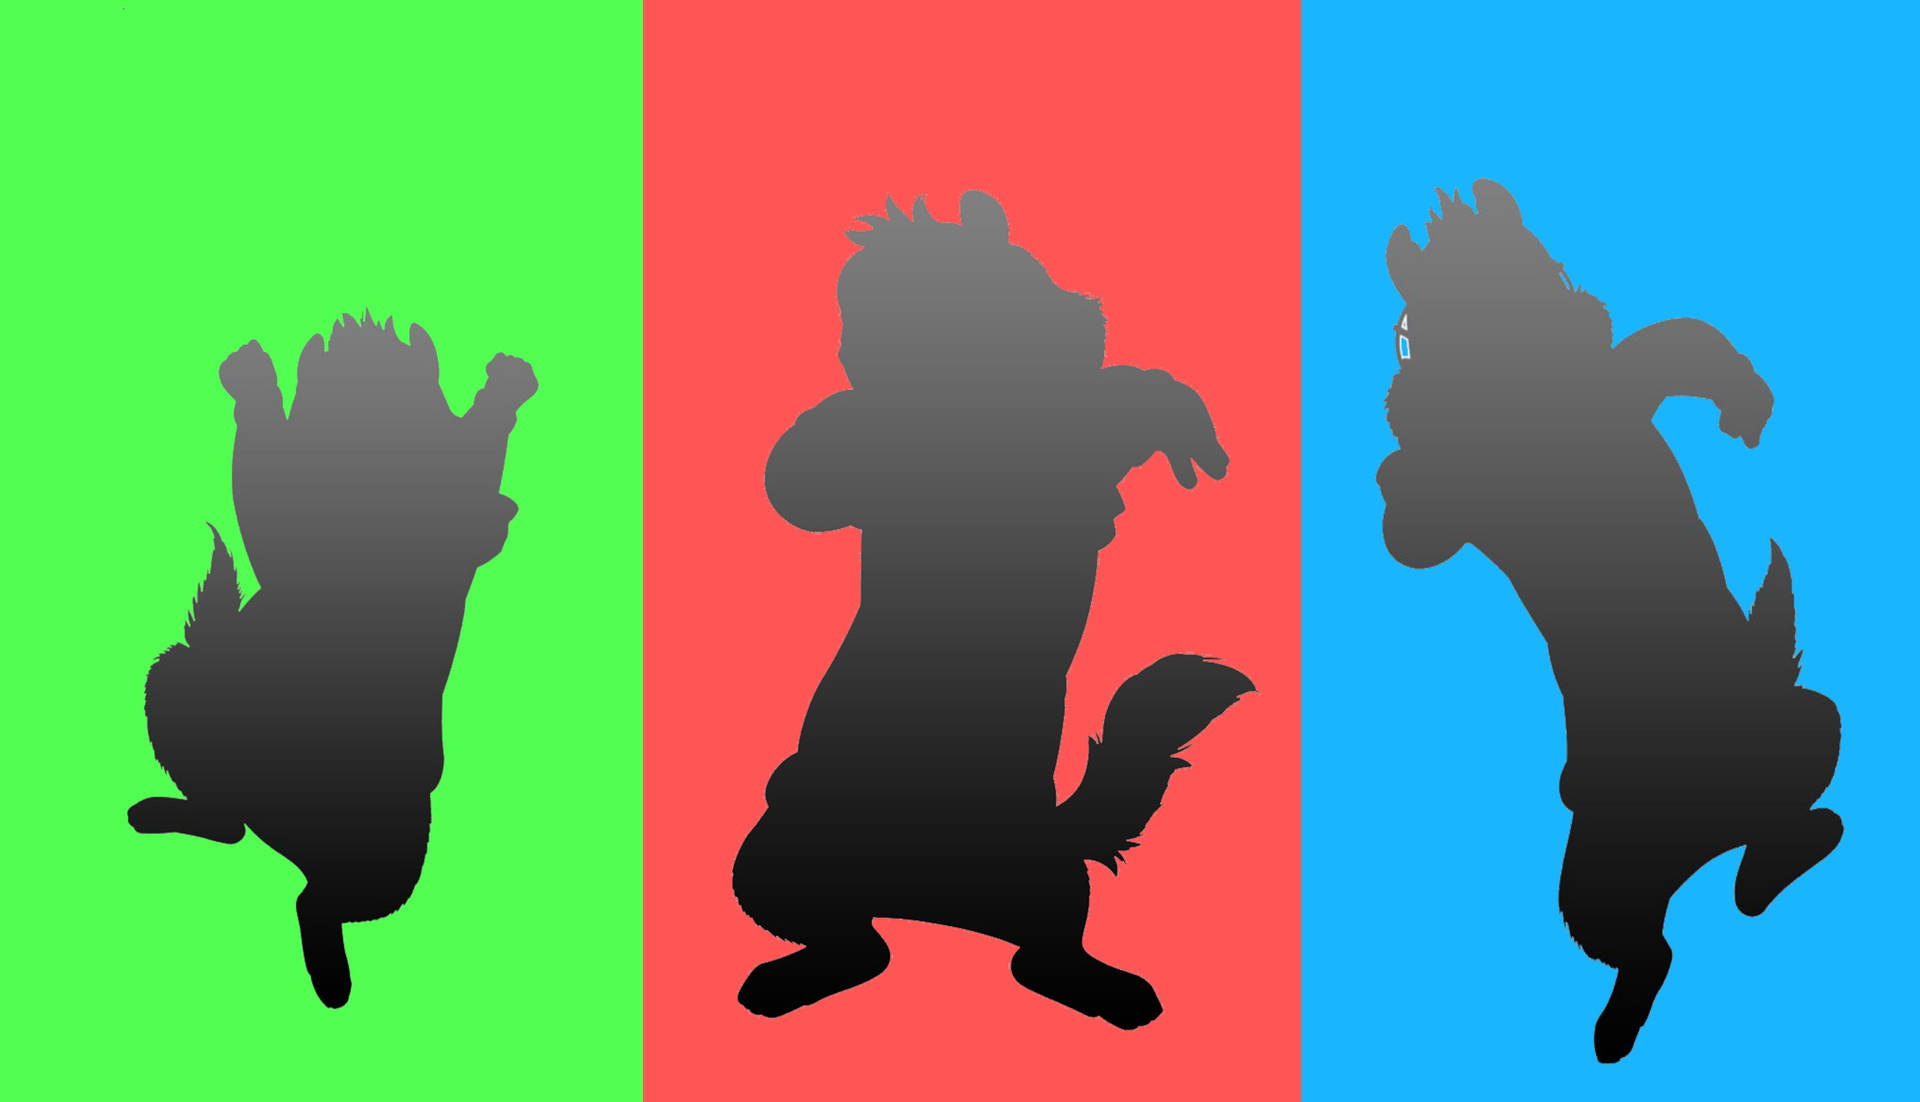 Alvin And The Chipmunks Silhouette Wallpaper